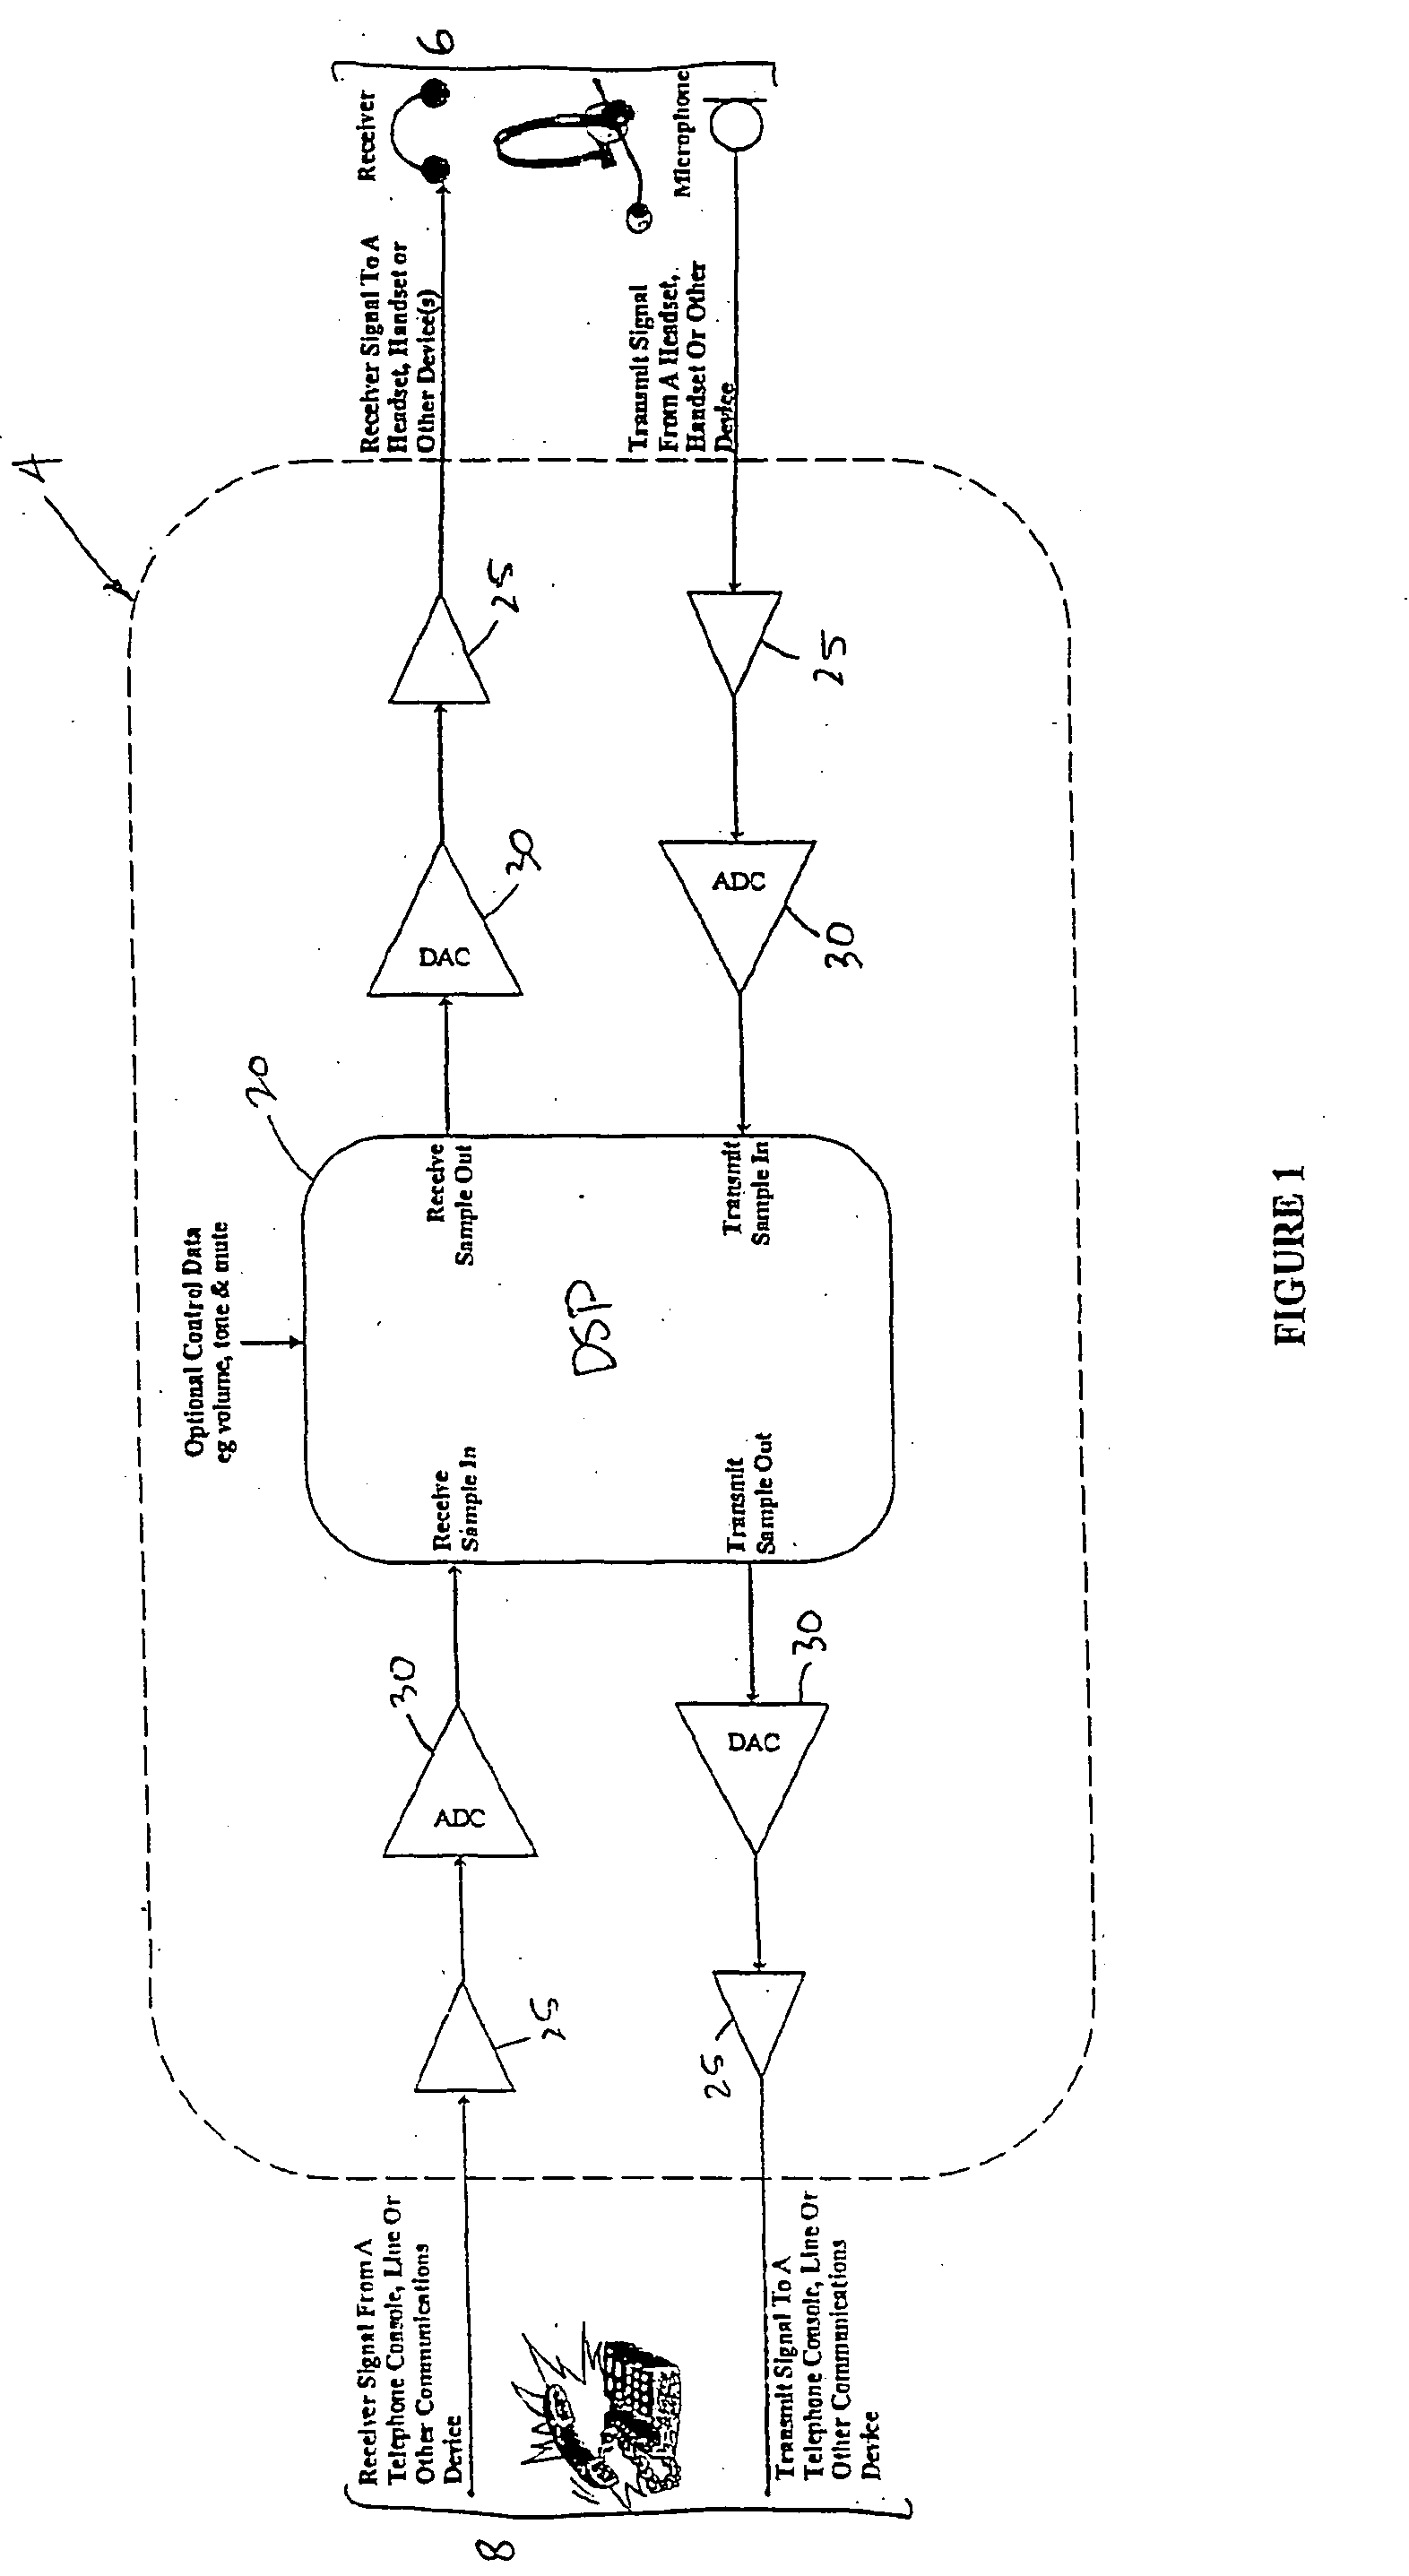 Digital signal processing system and method for a telephony interface apparatus